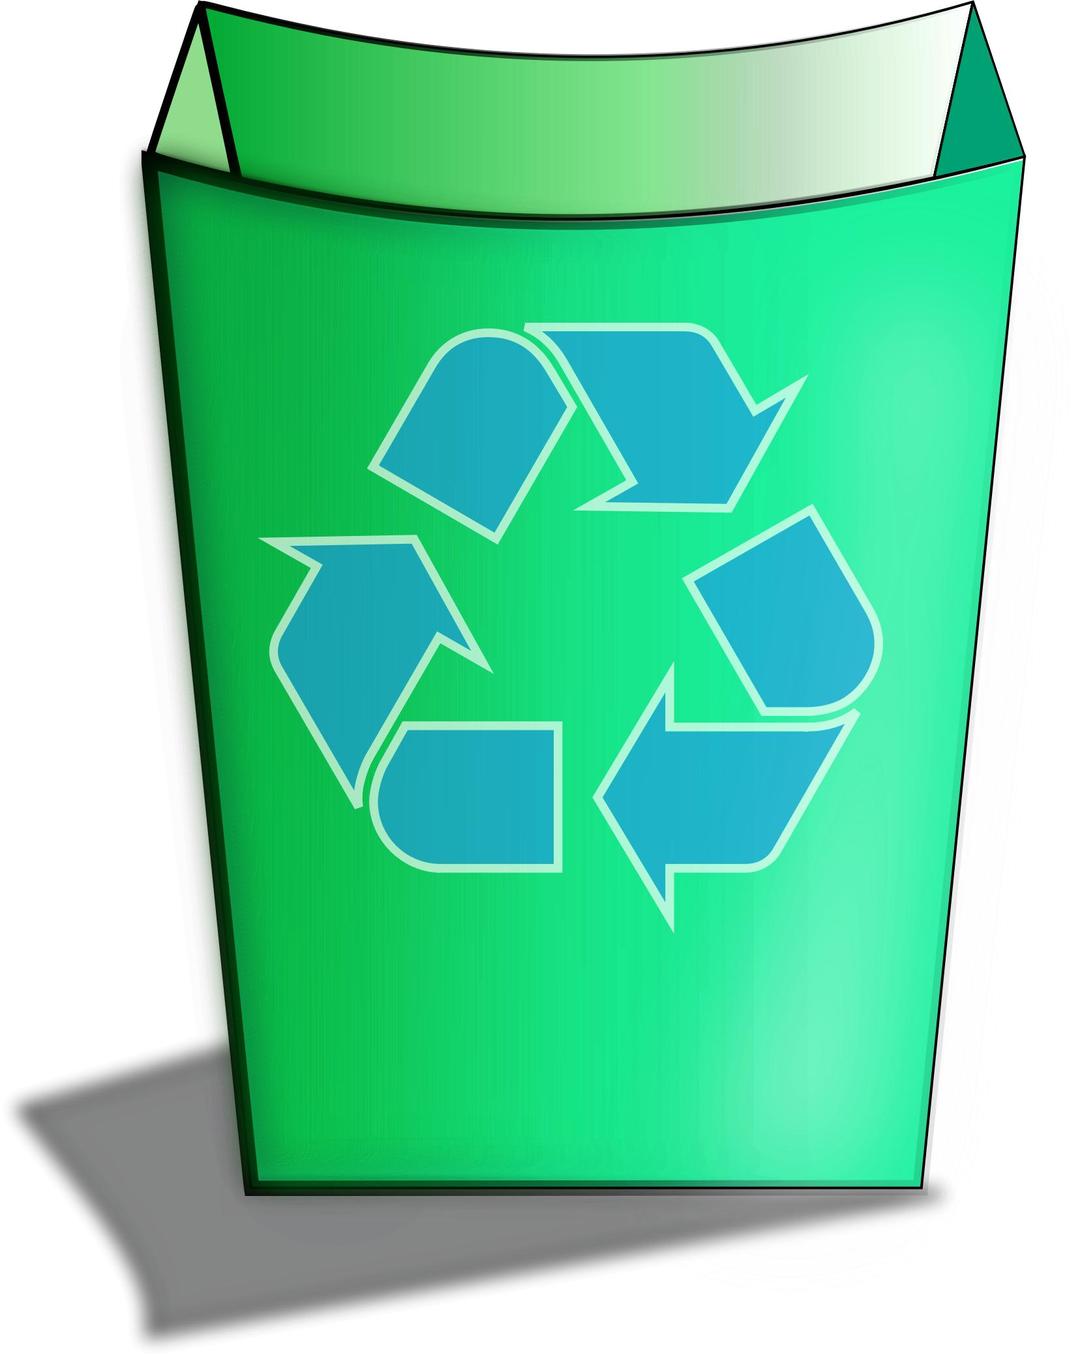 Green Recycle Bin png transparent